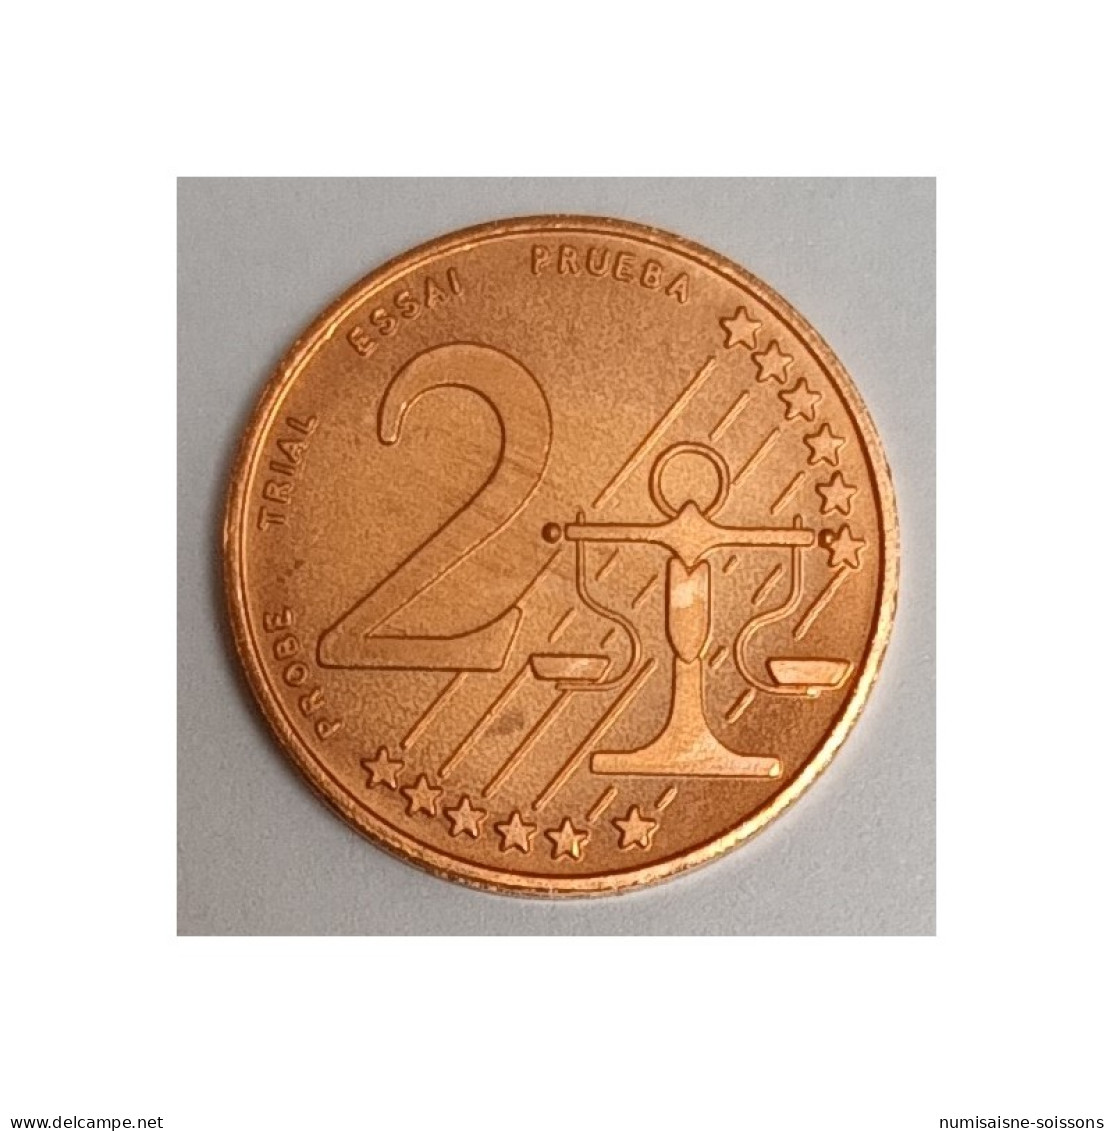 POLOGNE - 2 CENT 2004 - PROTOTYPE - FDC - Private Proofs / Unofficial